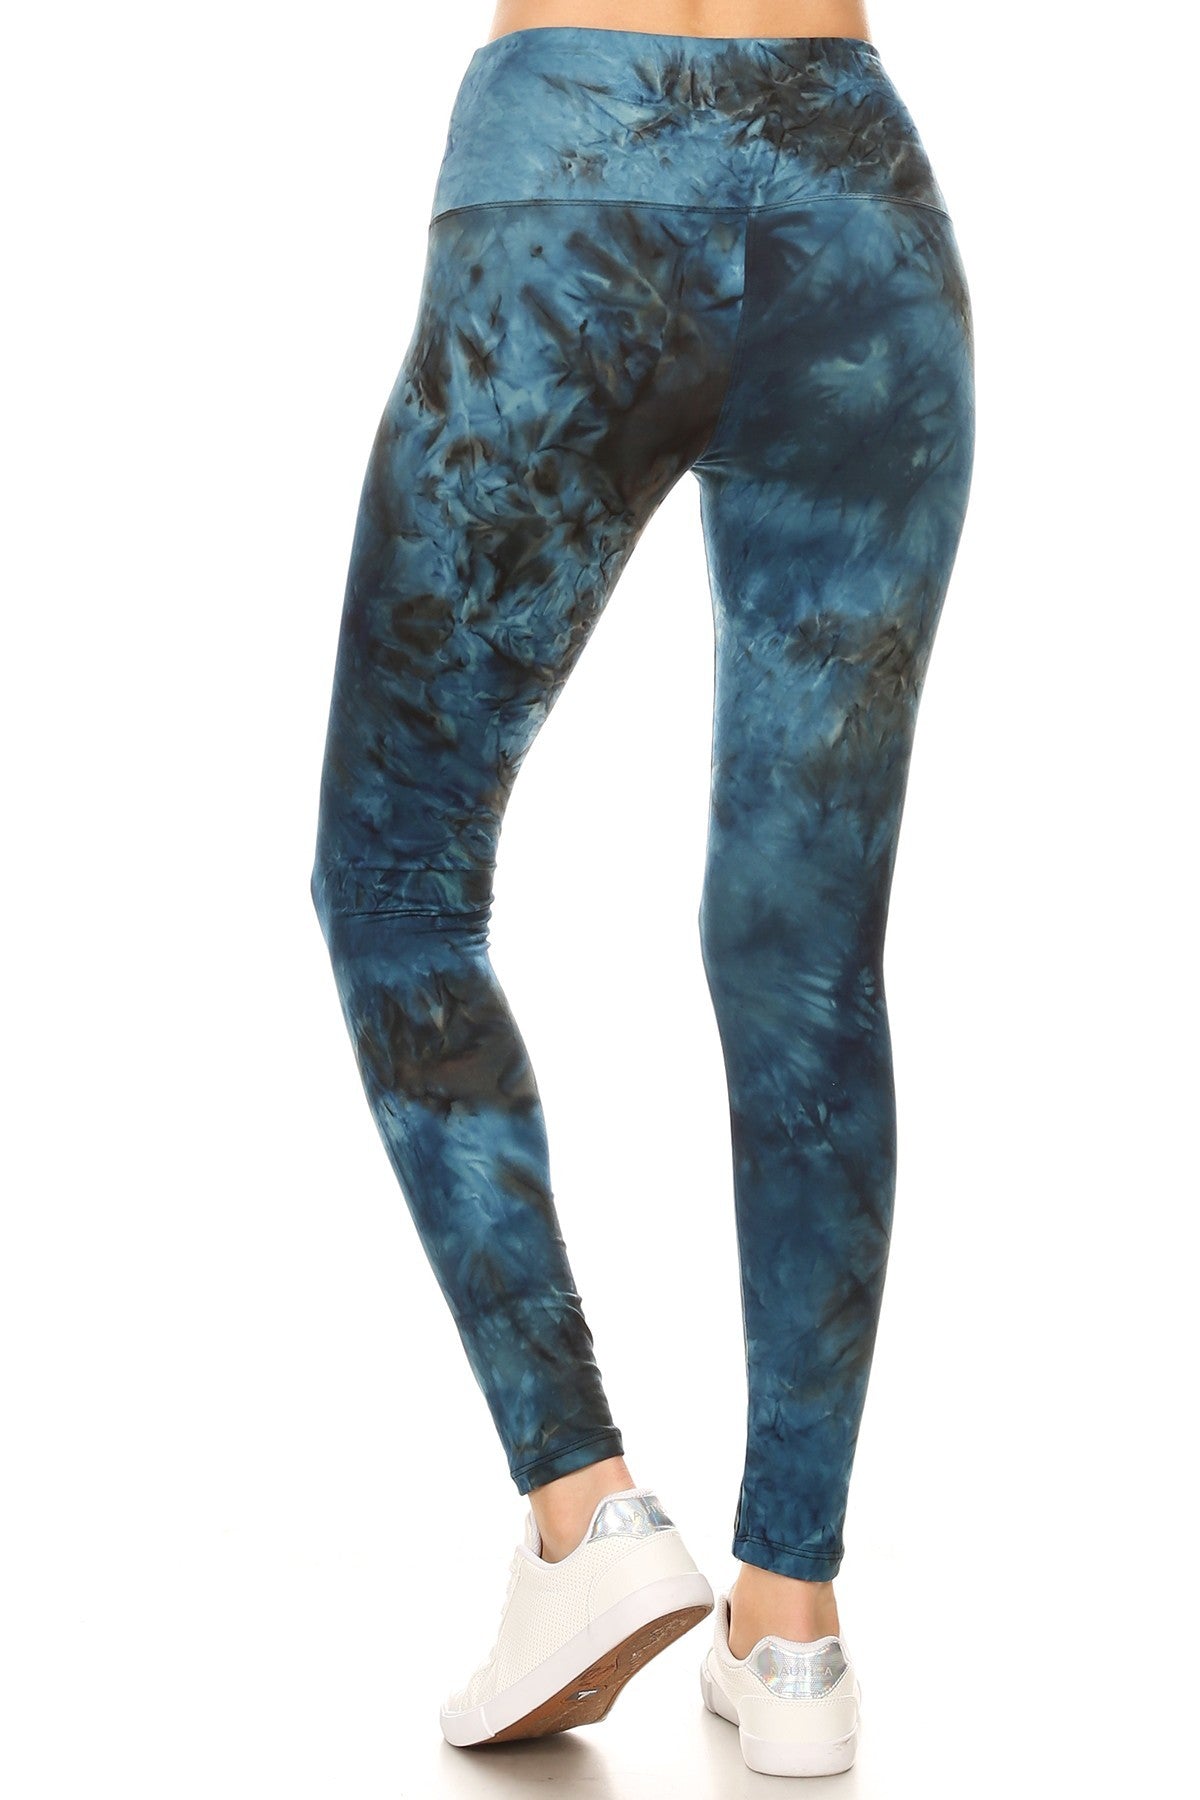 Relaxing Time Banded Lined Tie Dye Printed Knit Legging With High Waist Blue